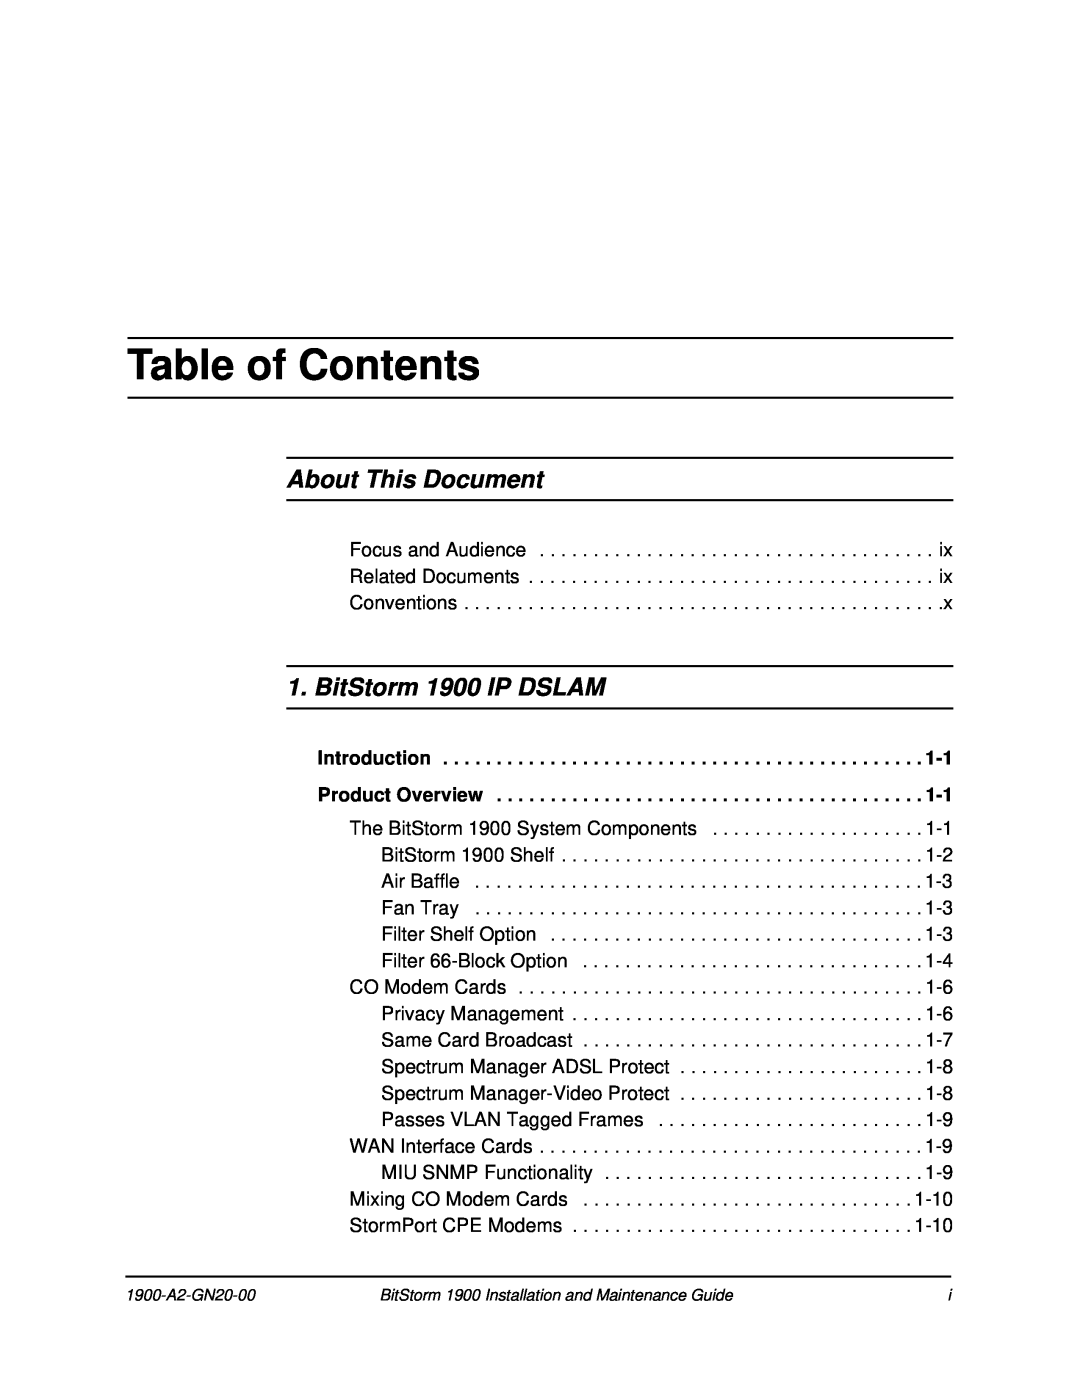 Paradyne manual Table of Contents, About This Document, BitStorm 1900 IP DSLAM 